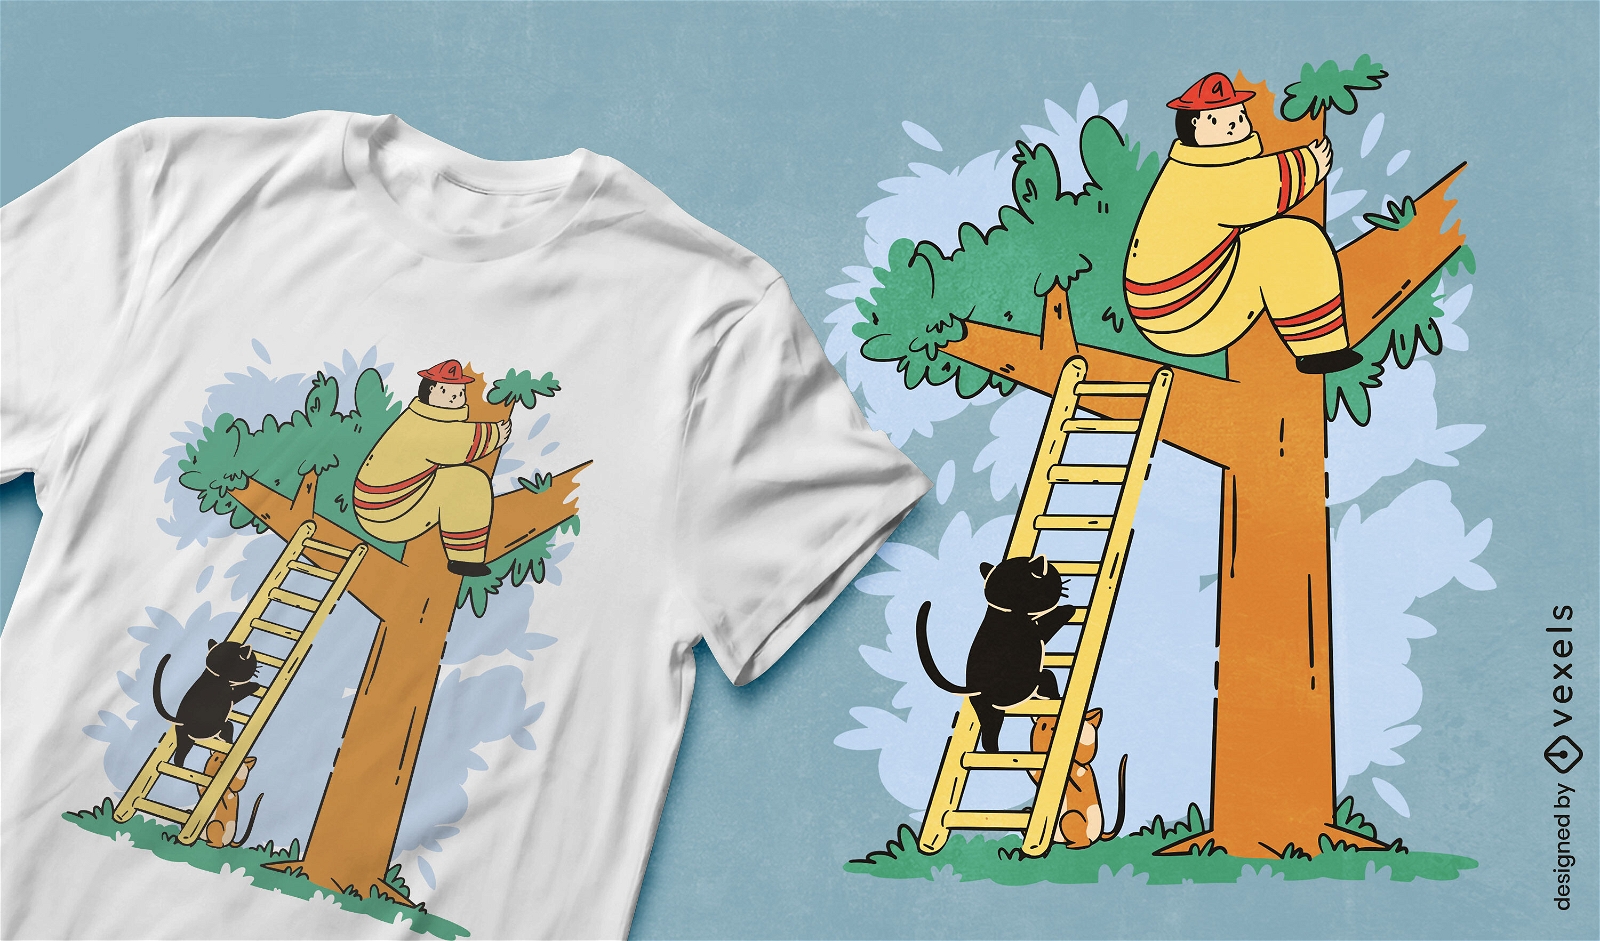 Funny rescue cat and firefighter t-shirt design